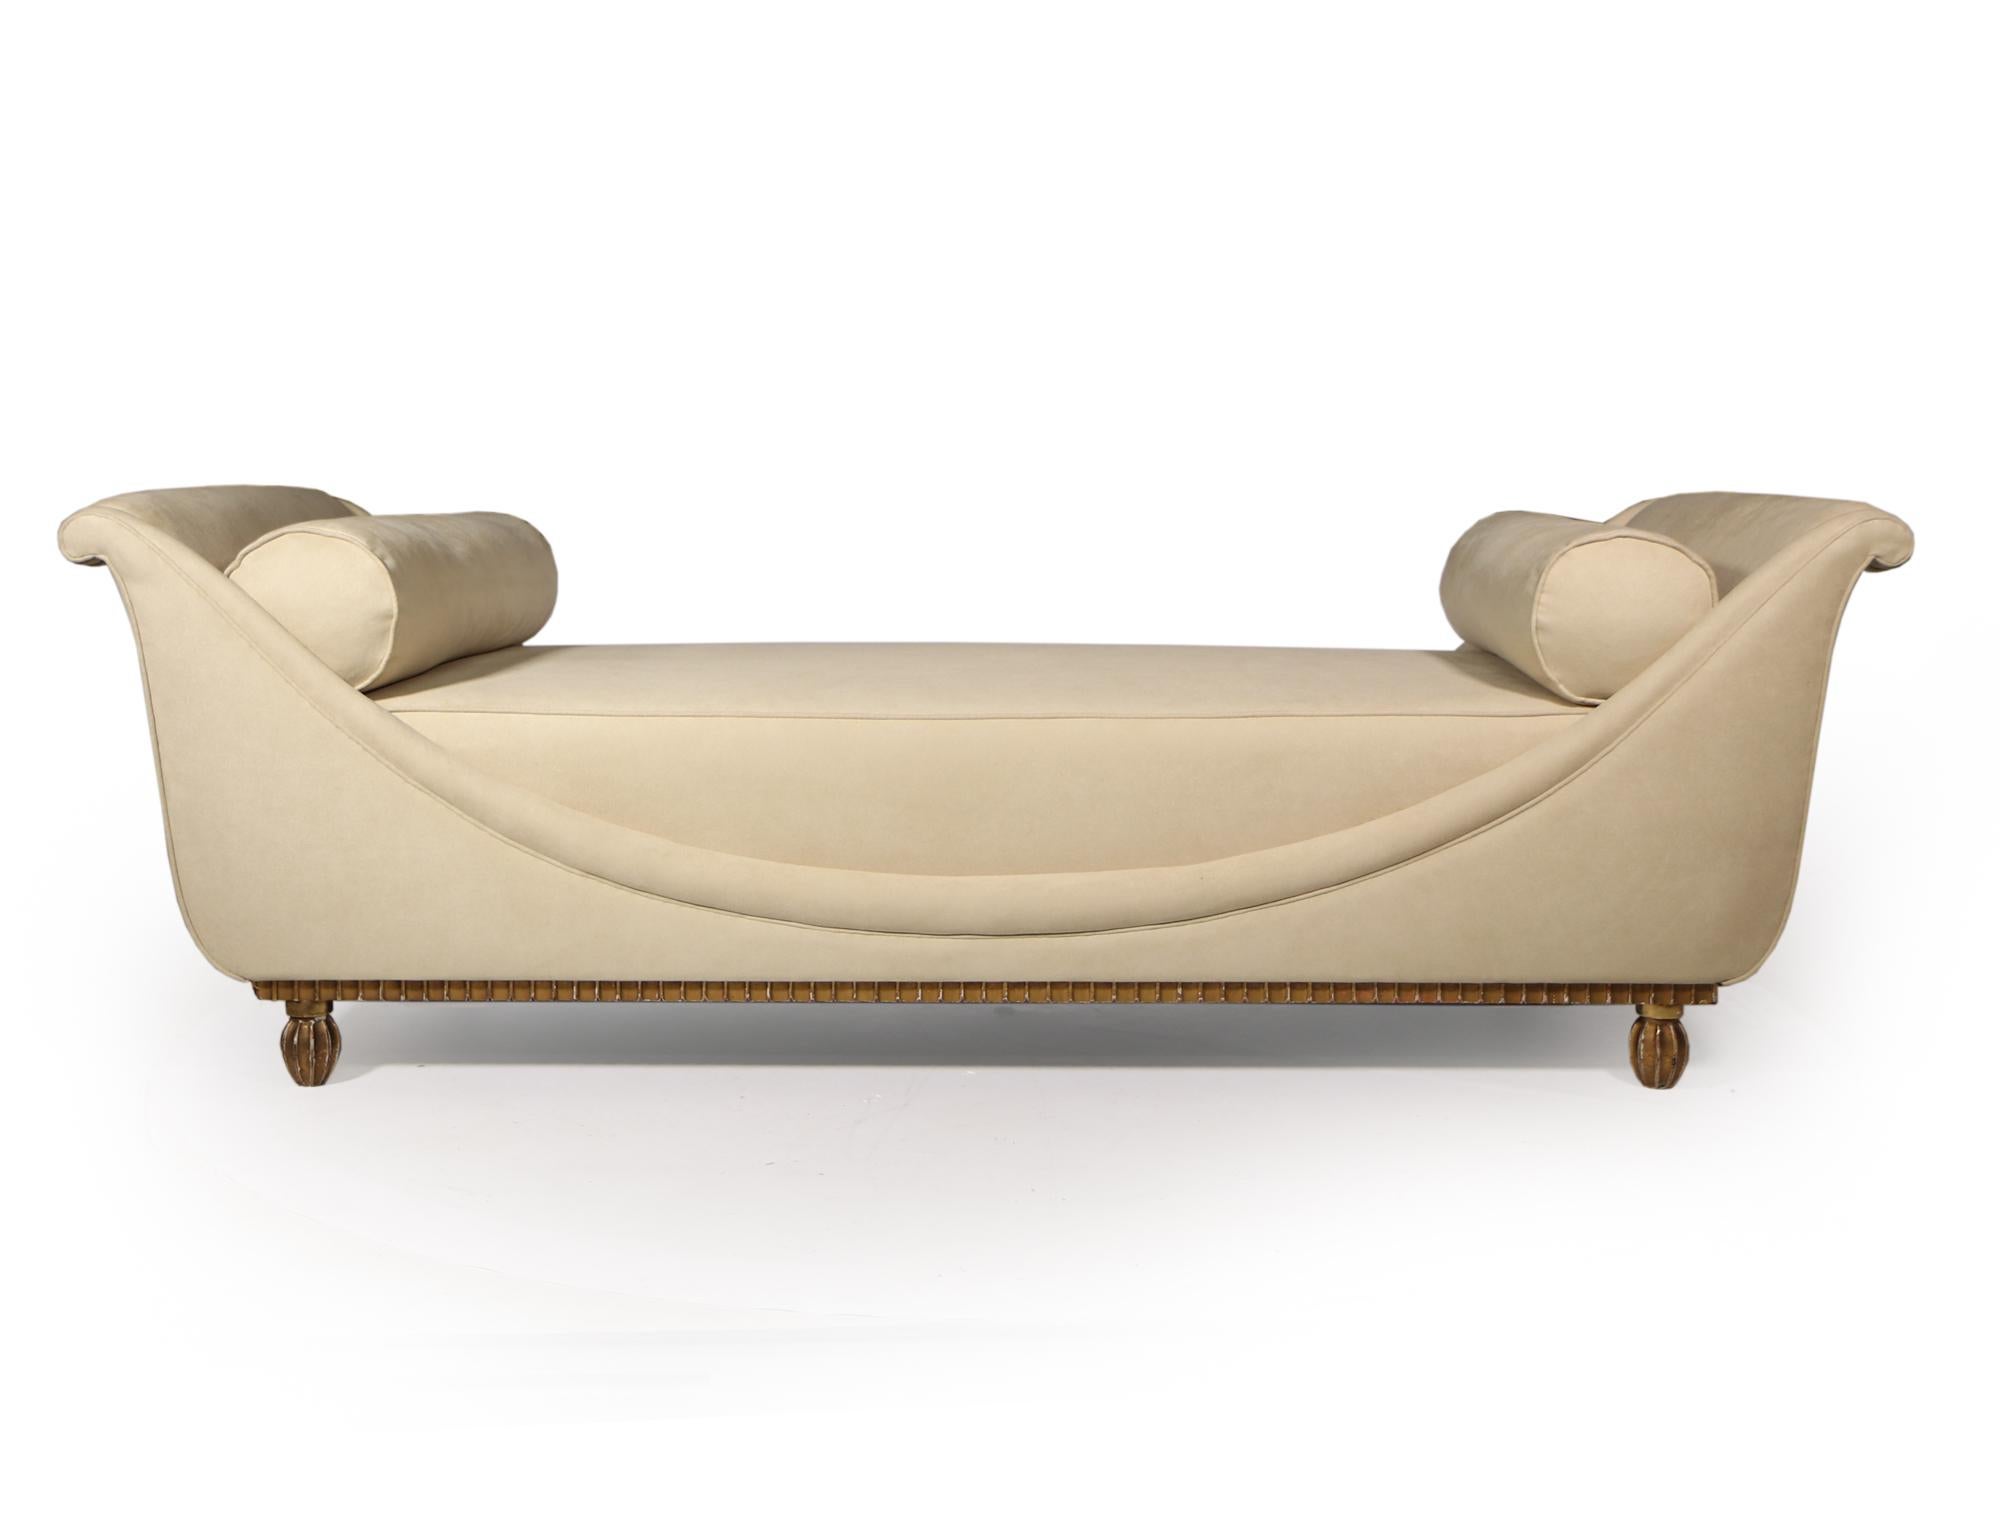 A French Art Deco daybed produced in the 1920’s and firmly attributable to Andre Arbus, although unsigned the frame is handmade and of exceptional quality and of a level expected to be Arbus, the gilded base is in excellent original condition with